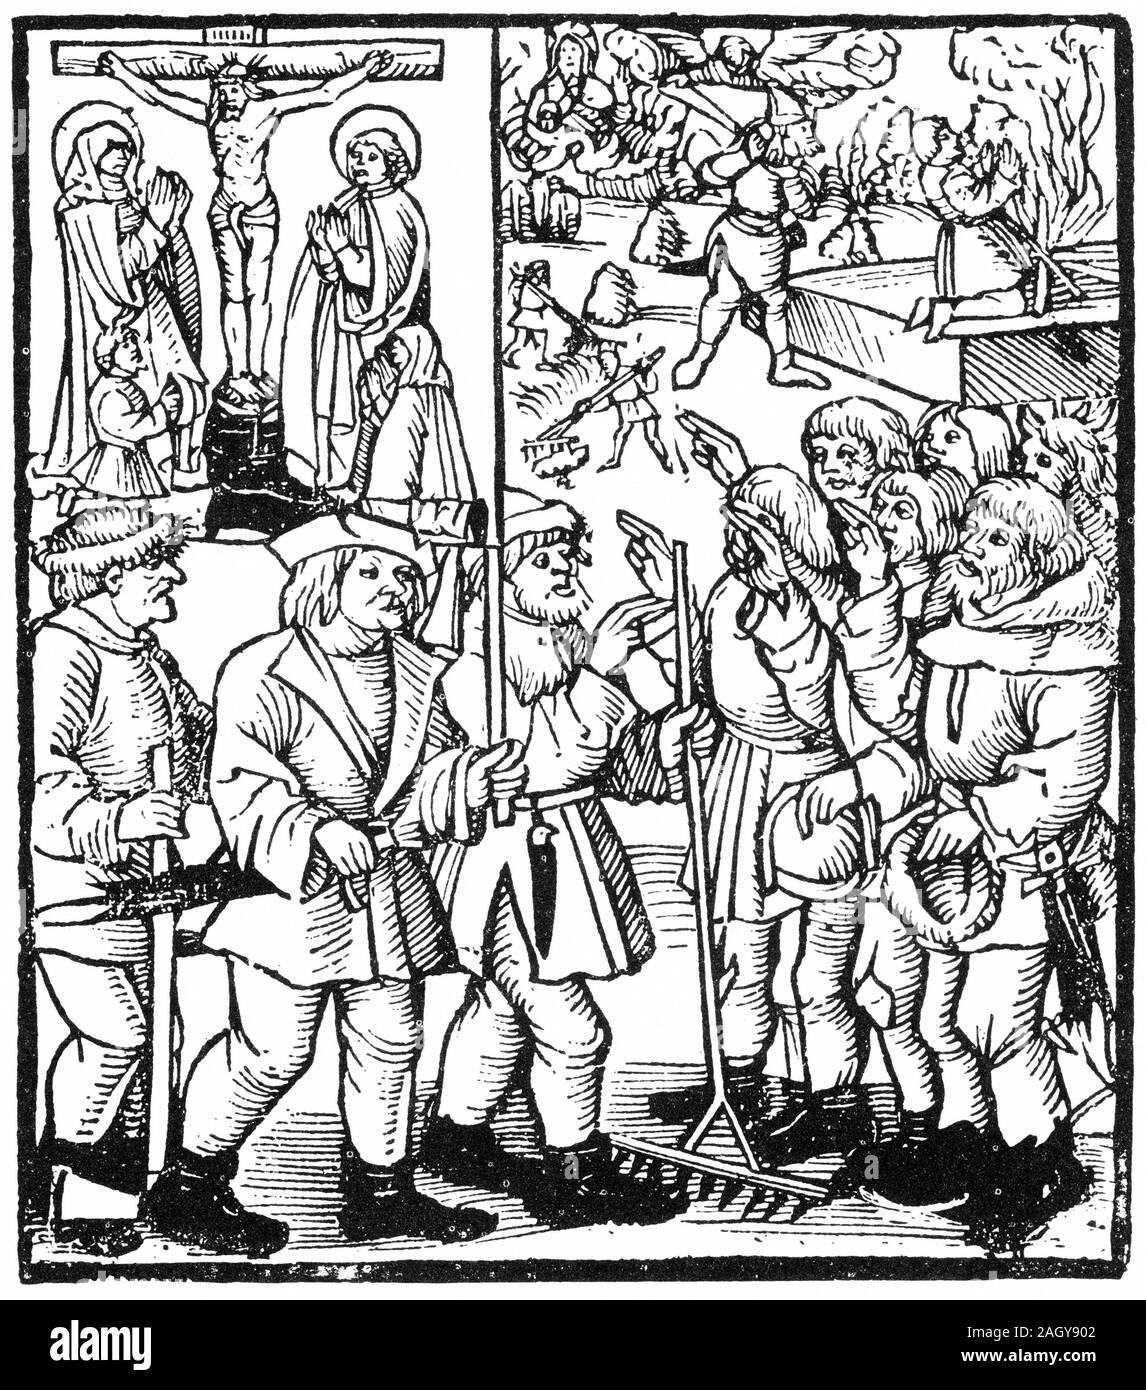 Engraving of German peasant hordes during the revolt of 1524-6 Stock Photo